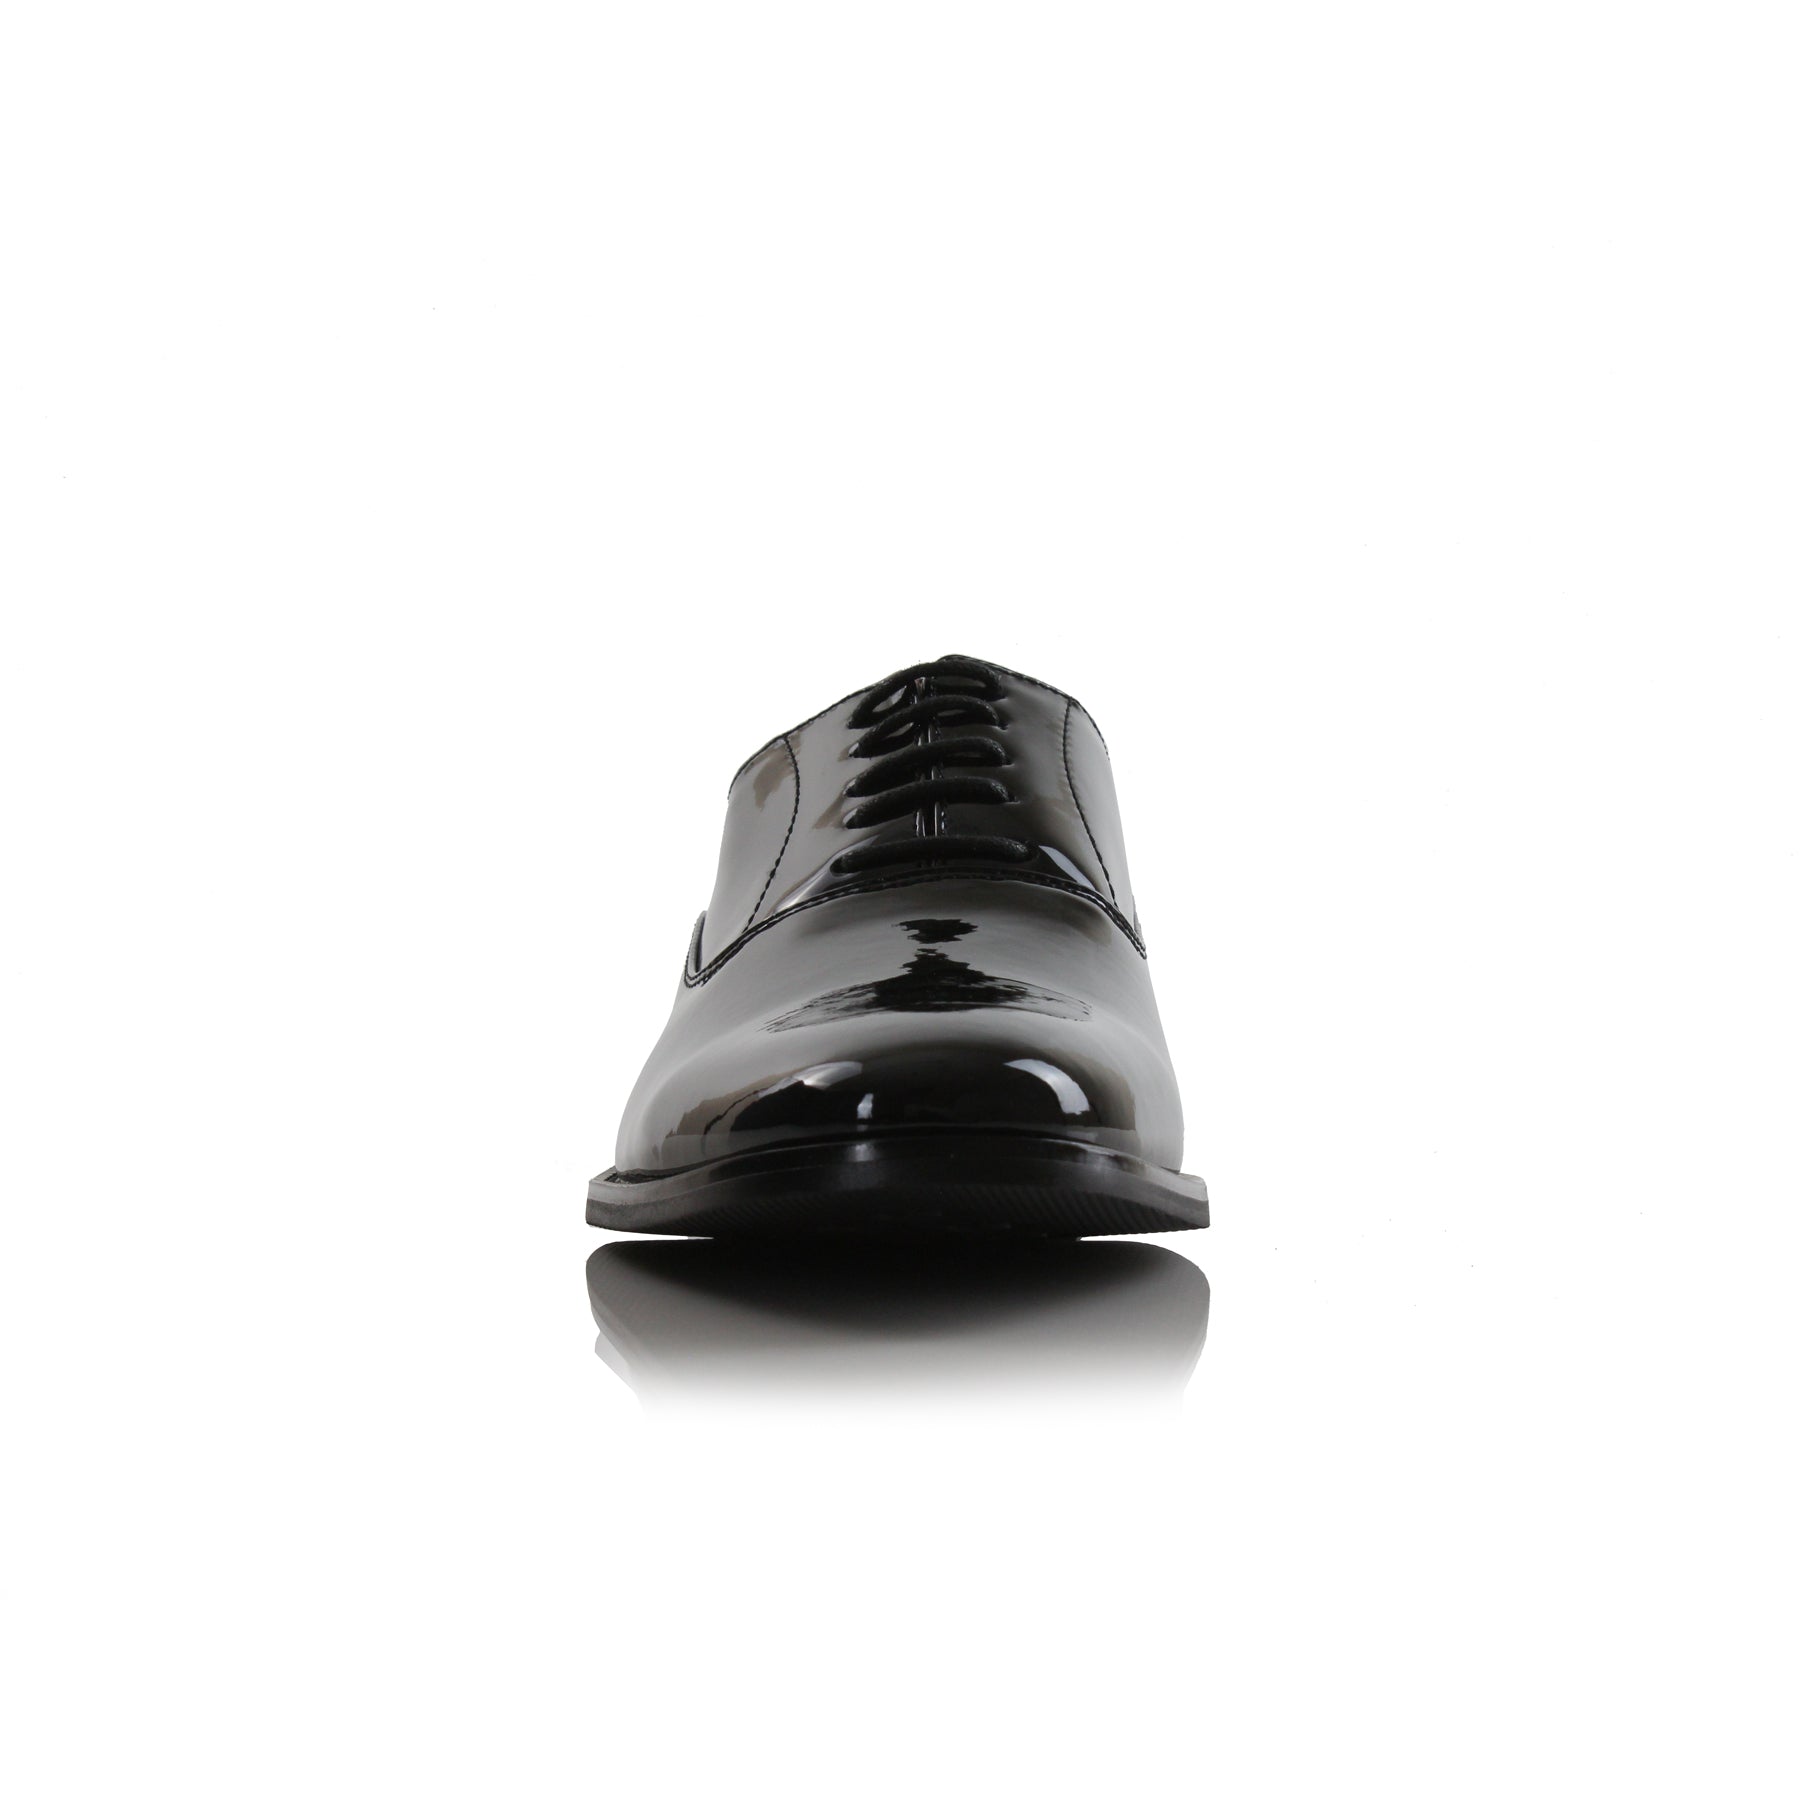 Faux Patent Leather Oxfords | George by Ferro Aldo | Conal Footwear | Front Angle View